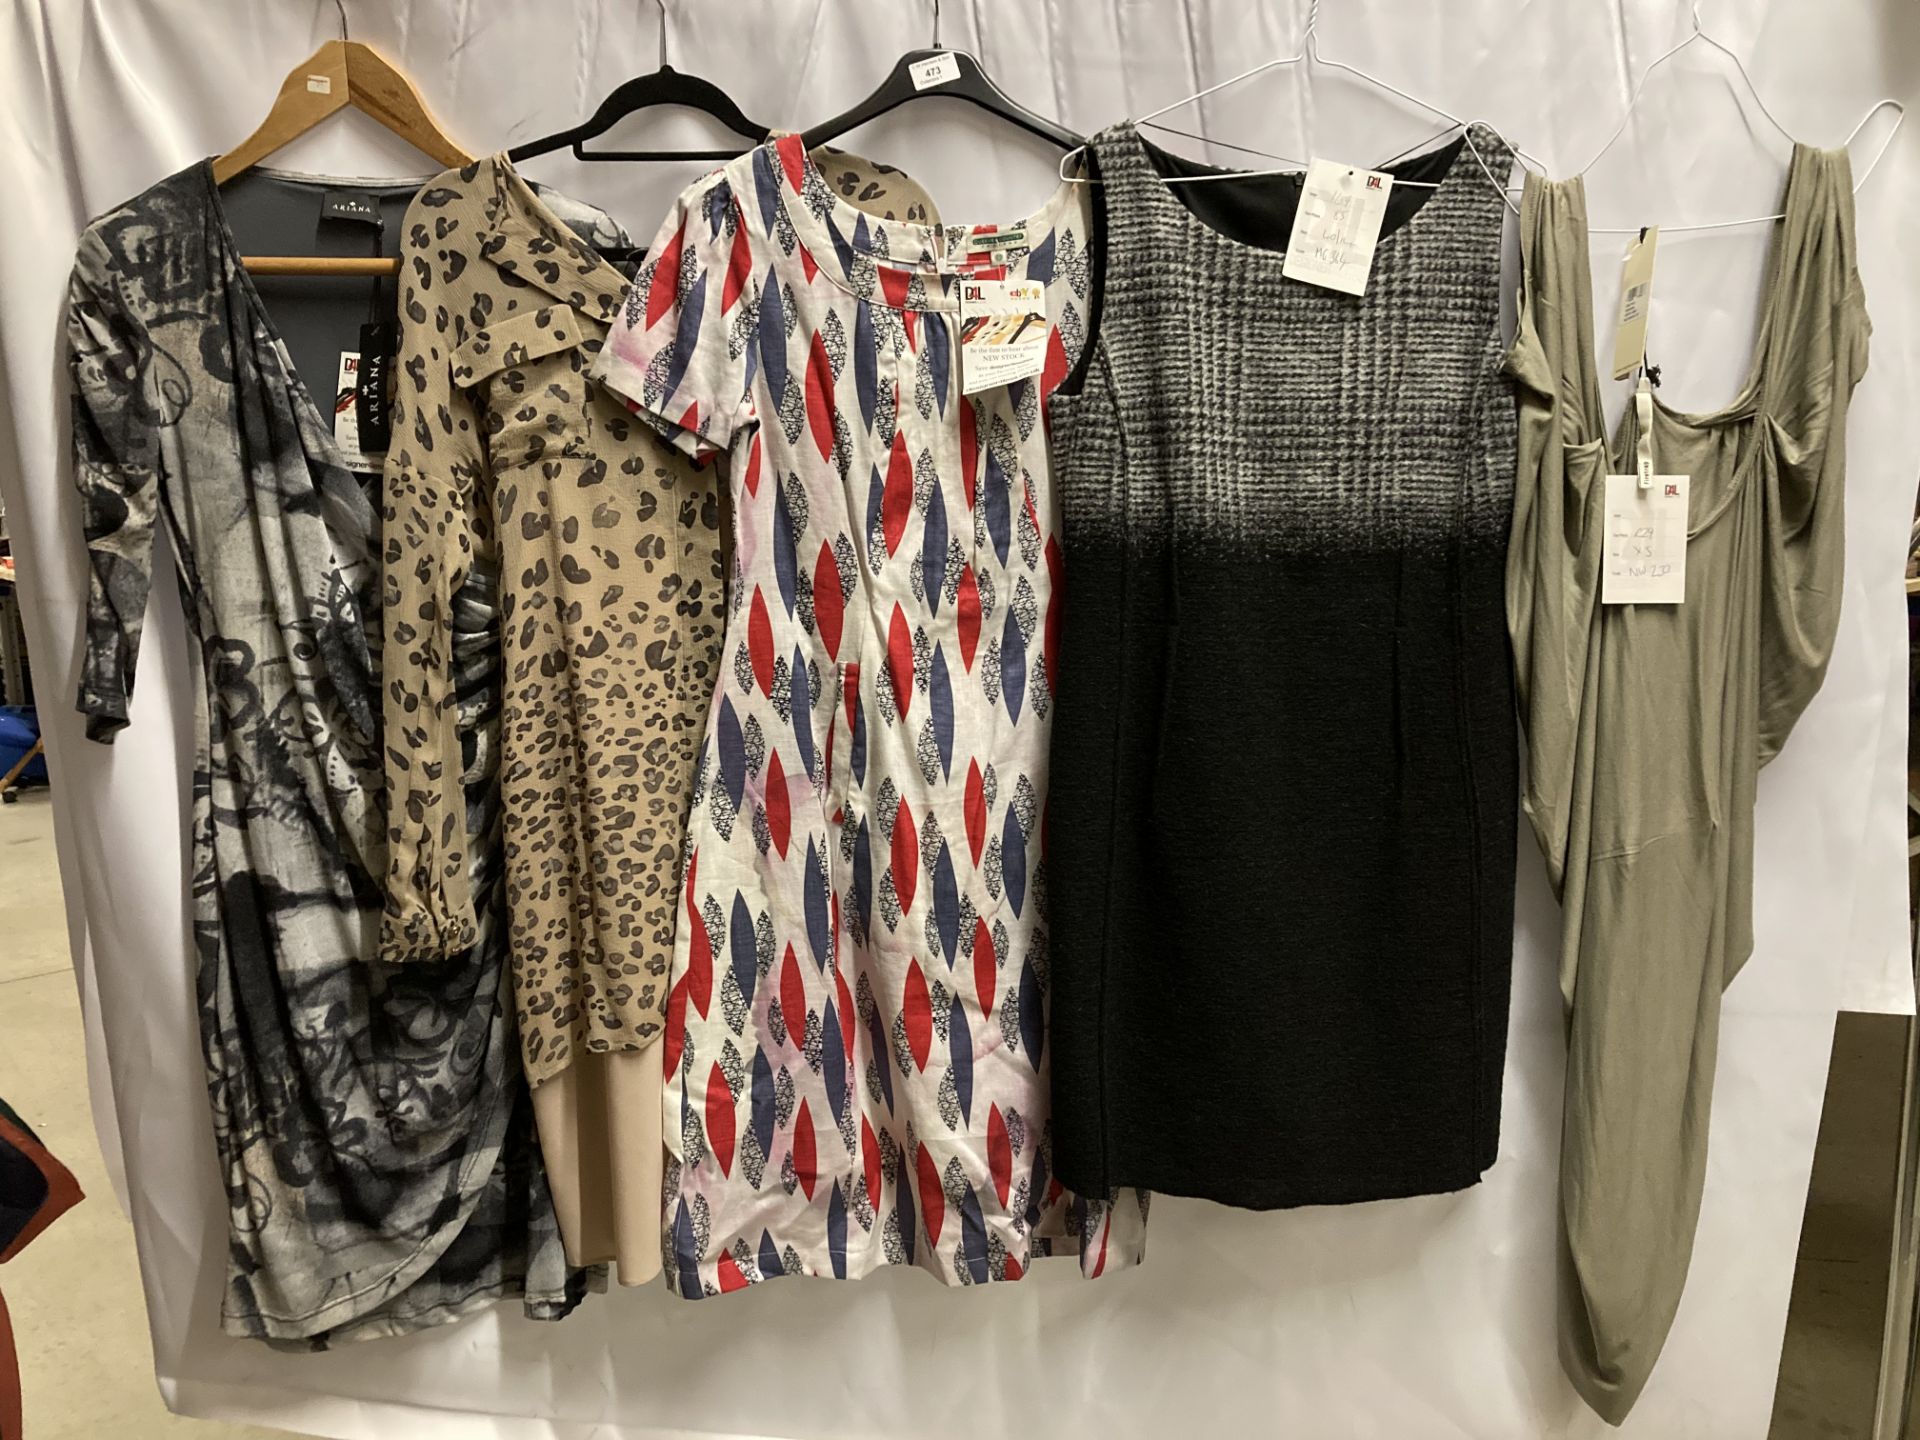 5 x assorted ladies medium length dresses by Firetrap, Queen & Country, Ariana, etc.